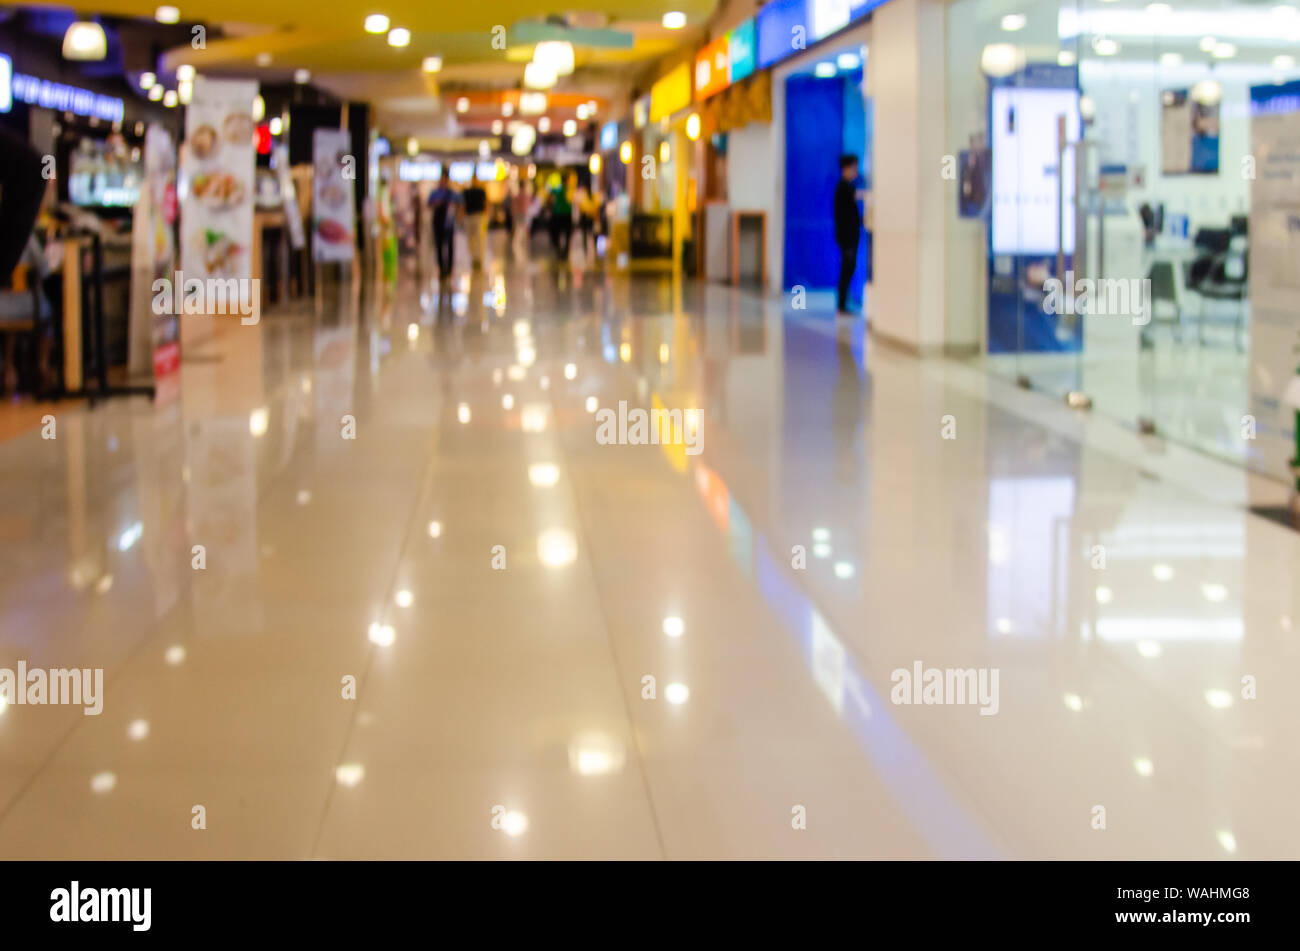 Blurred image of shopping mall and people walking for background usage  Sale banner in shop window Stock Photo  Alamy